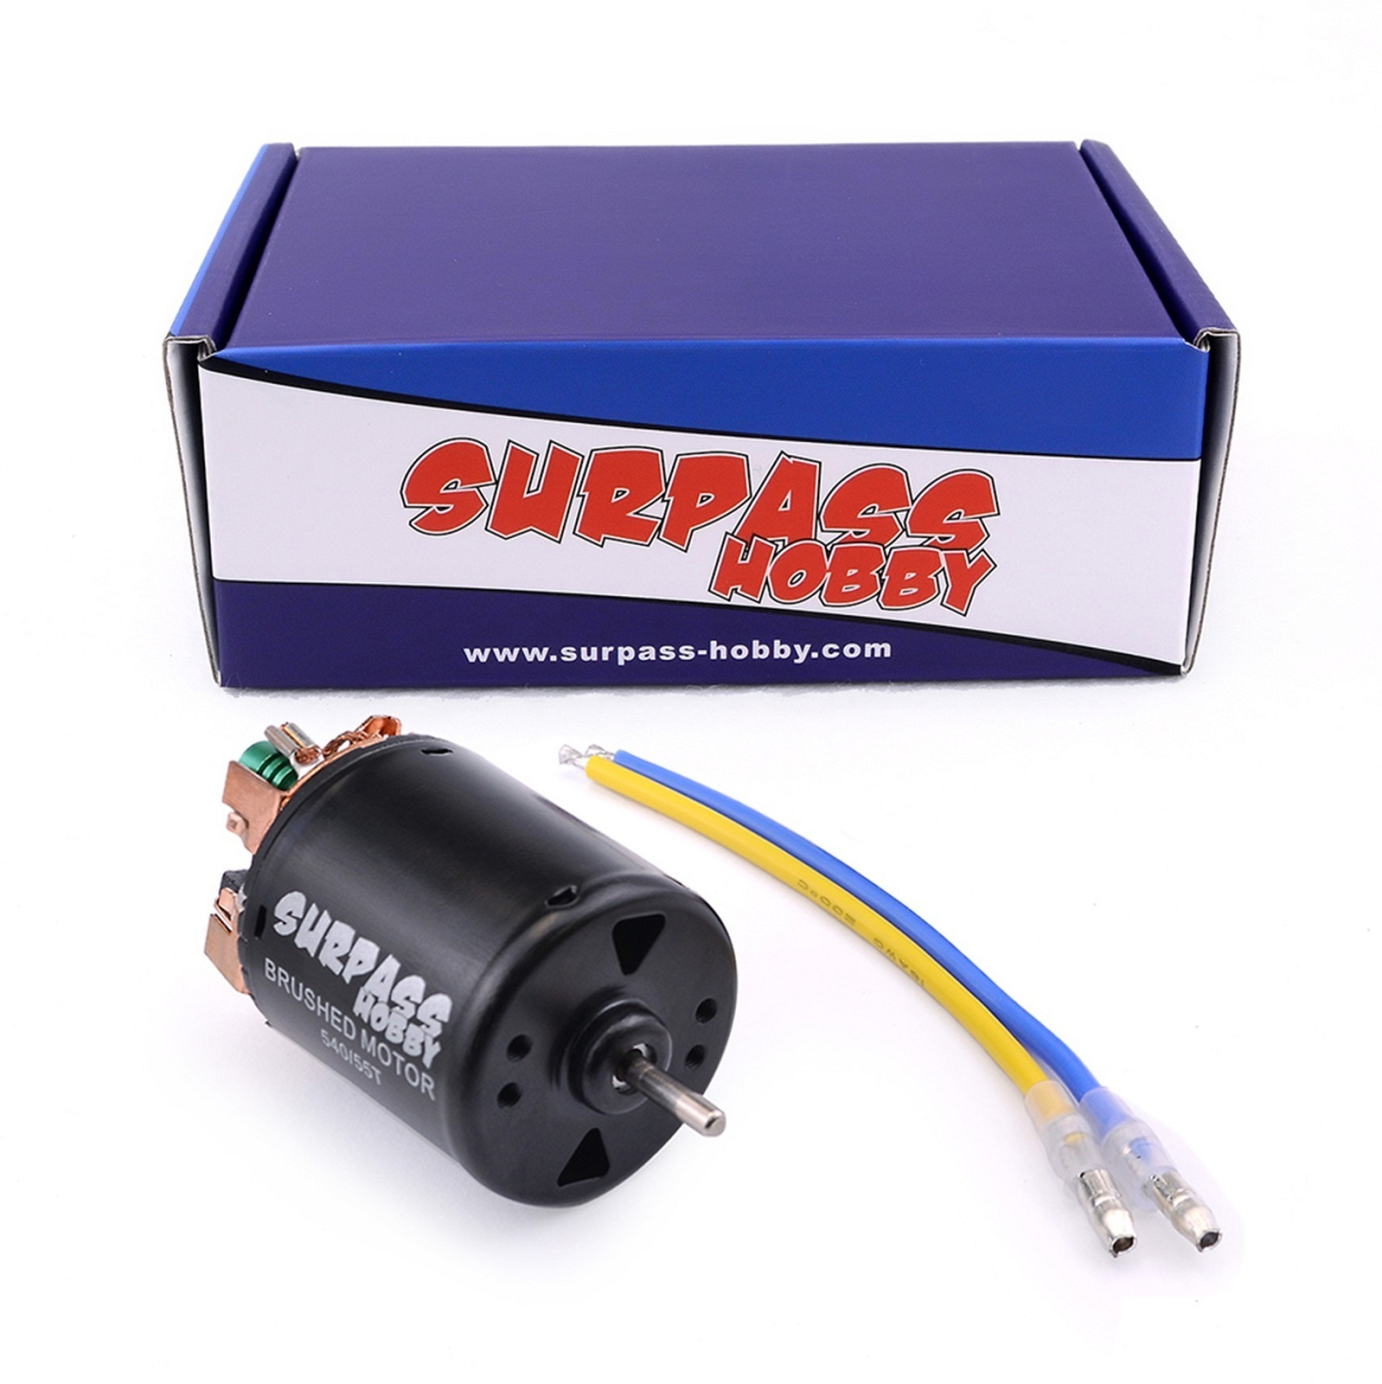 Surpass Hobby 540 brushed motor 3-slot 45T RPM: 10500 IO: 0.7A ?